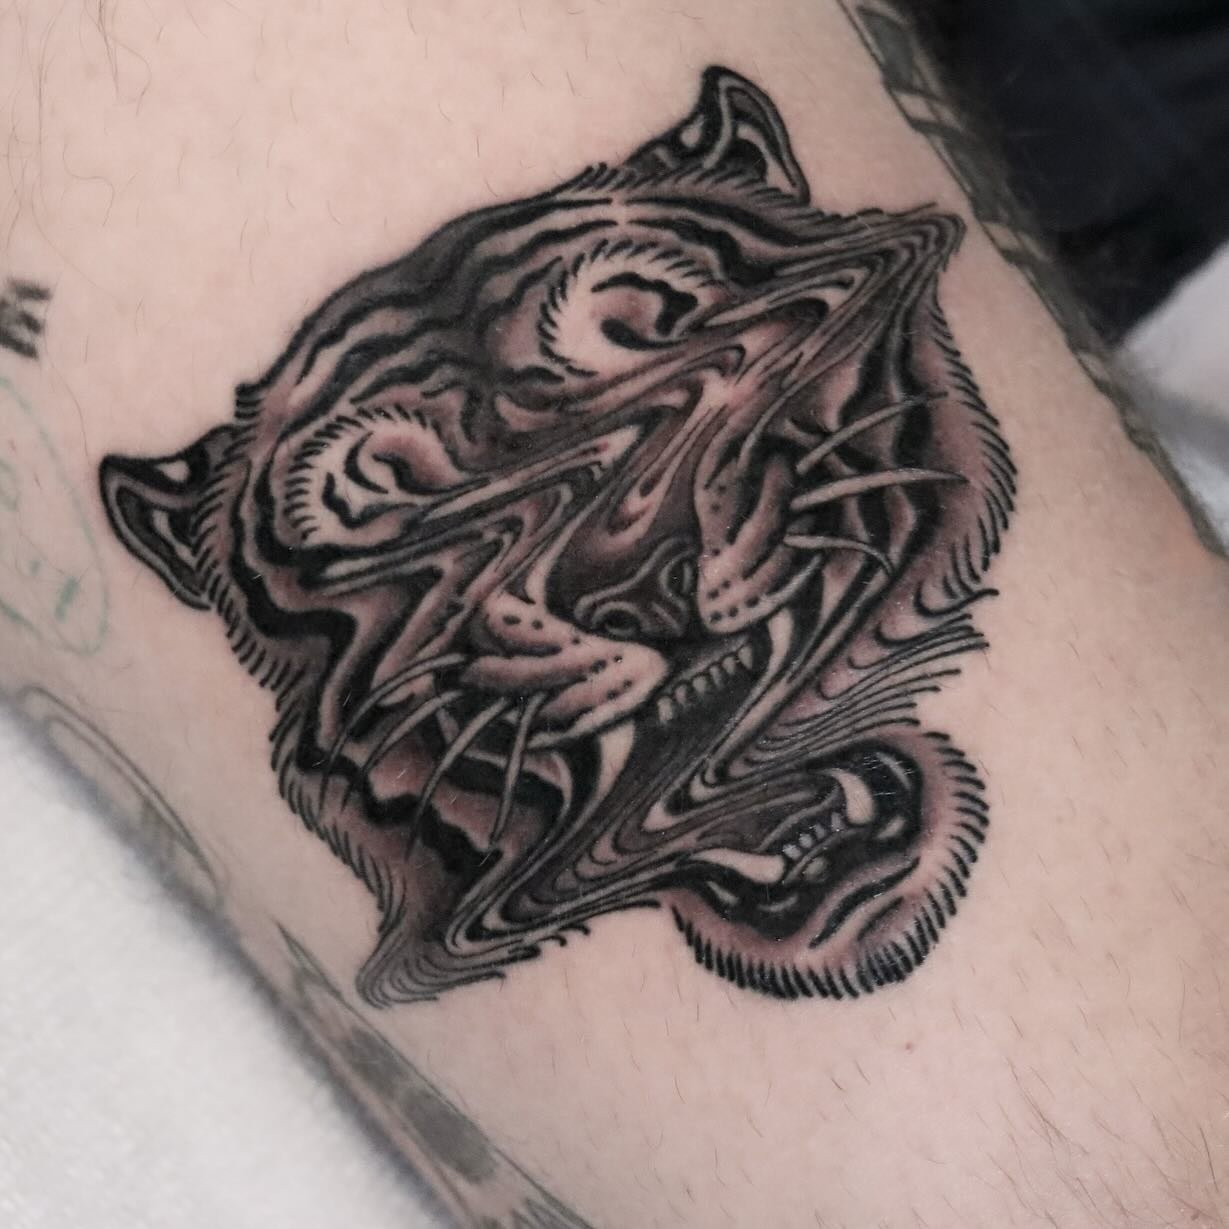 Thank you Lee! 🙏🐯✨ flash is always available 🥰
.
.
.
.
.
.
.
#tiger #tigertattoo #psychedelic #trippy 
#sandiegotattooartist #sandiegotattoo #sdtattoo #blackworkers #blackworktattoo #blacktattoo #btattooing #blackandgrey #bng #ladytattooer #female